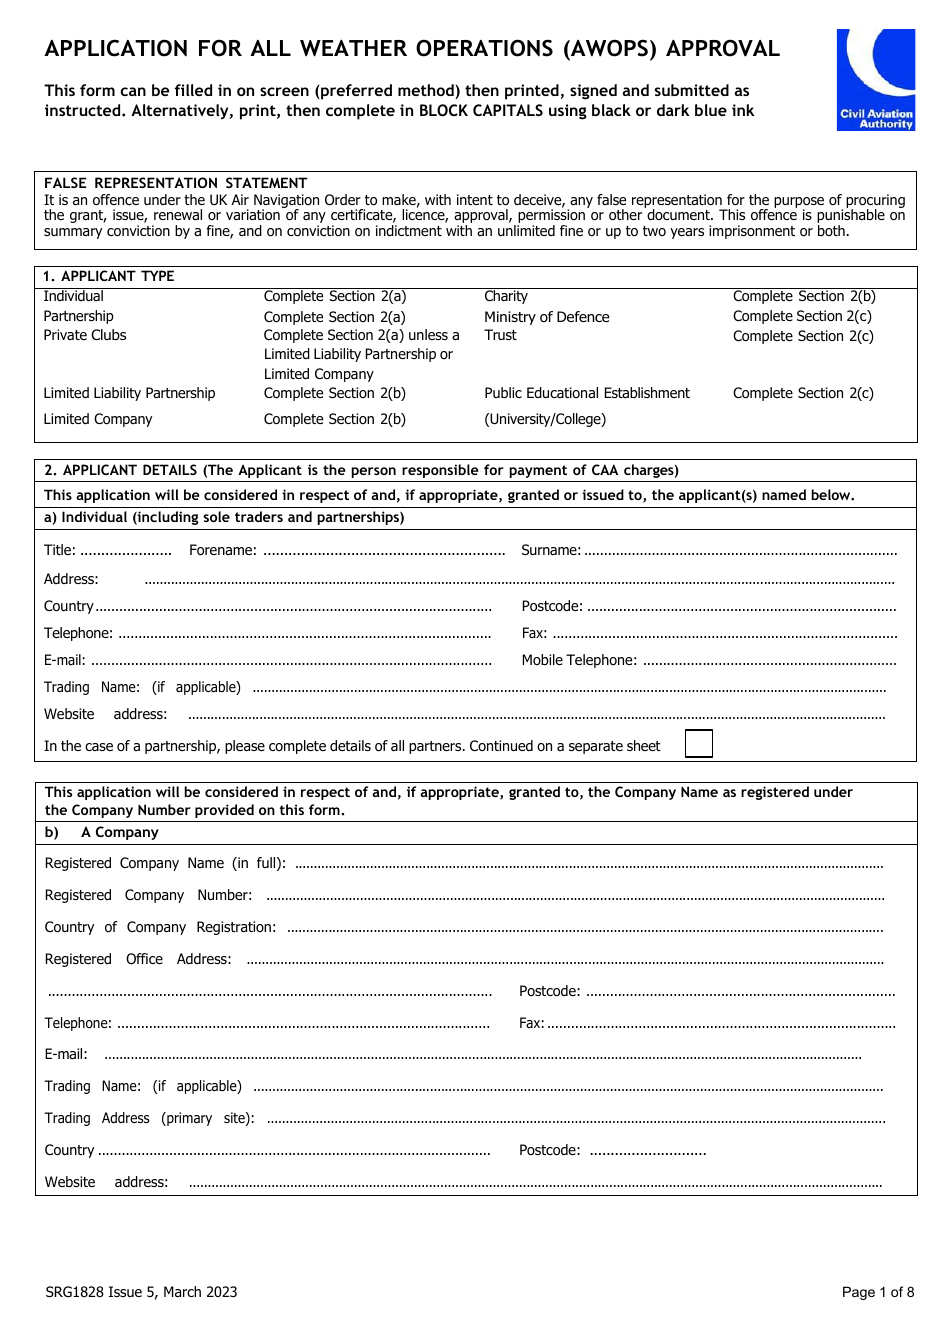 Form SRG1828 Application for All Weather Operations (Awops) Approval - United Kingdom, Page 1